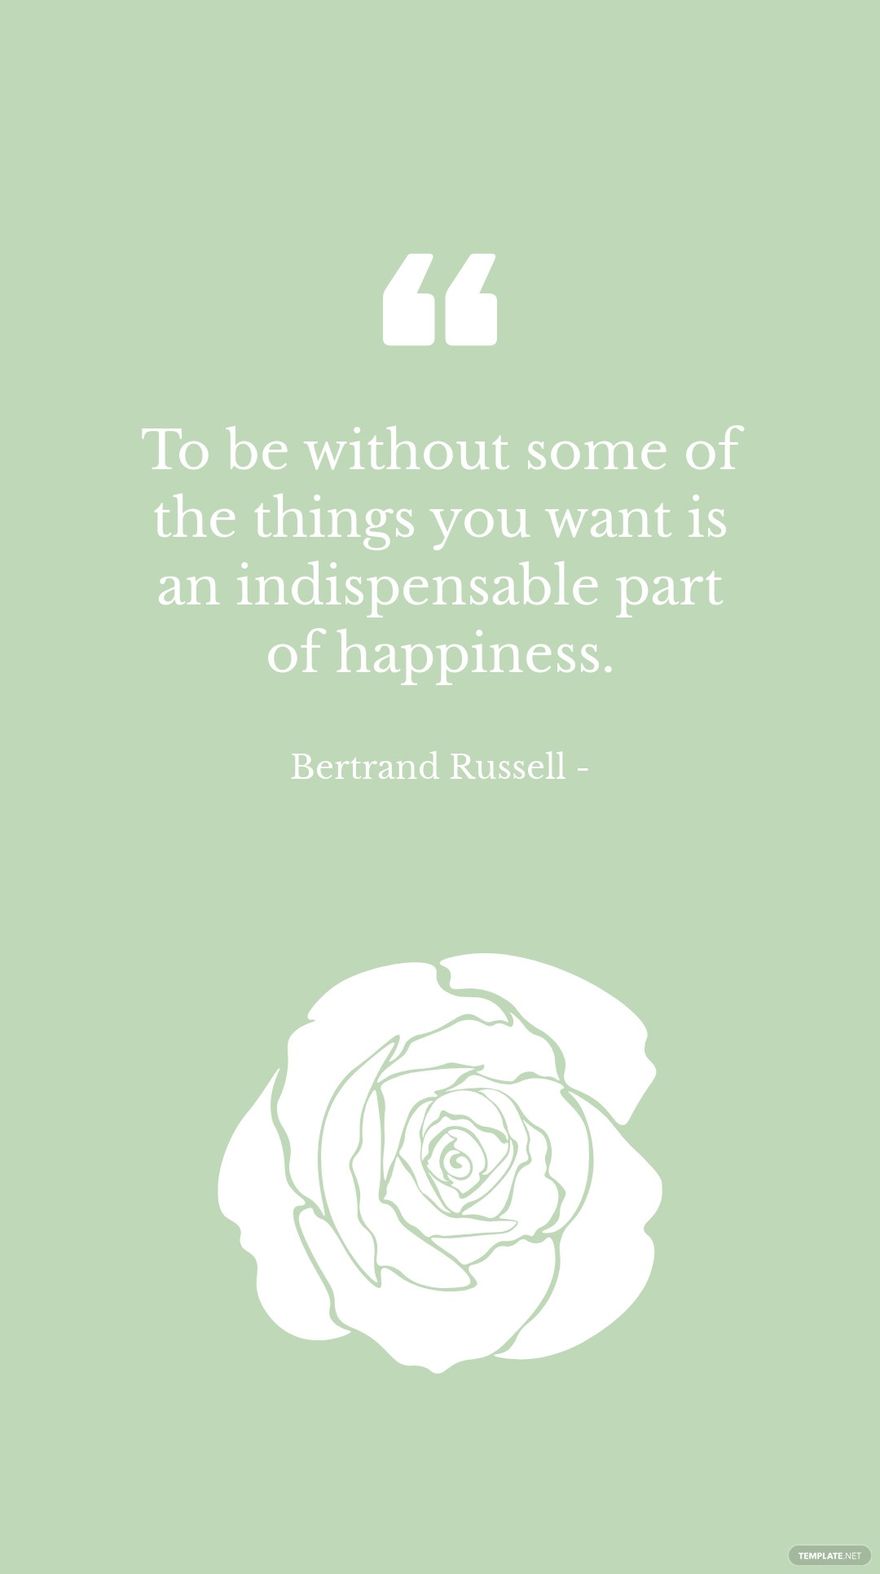 Free Bertrand Russell - To be without some of the things you want is an indispensable part of happiness. in JPG